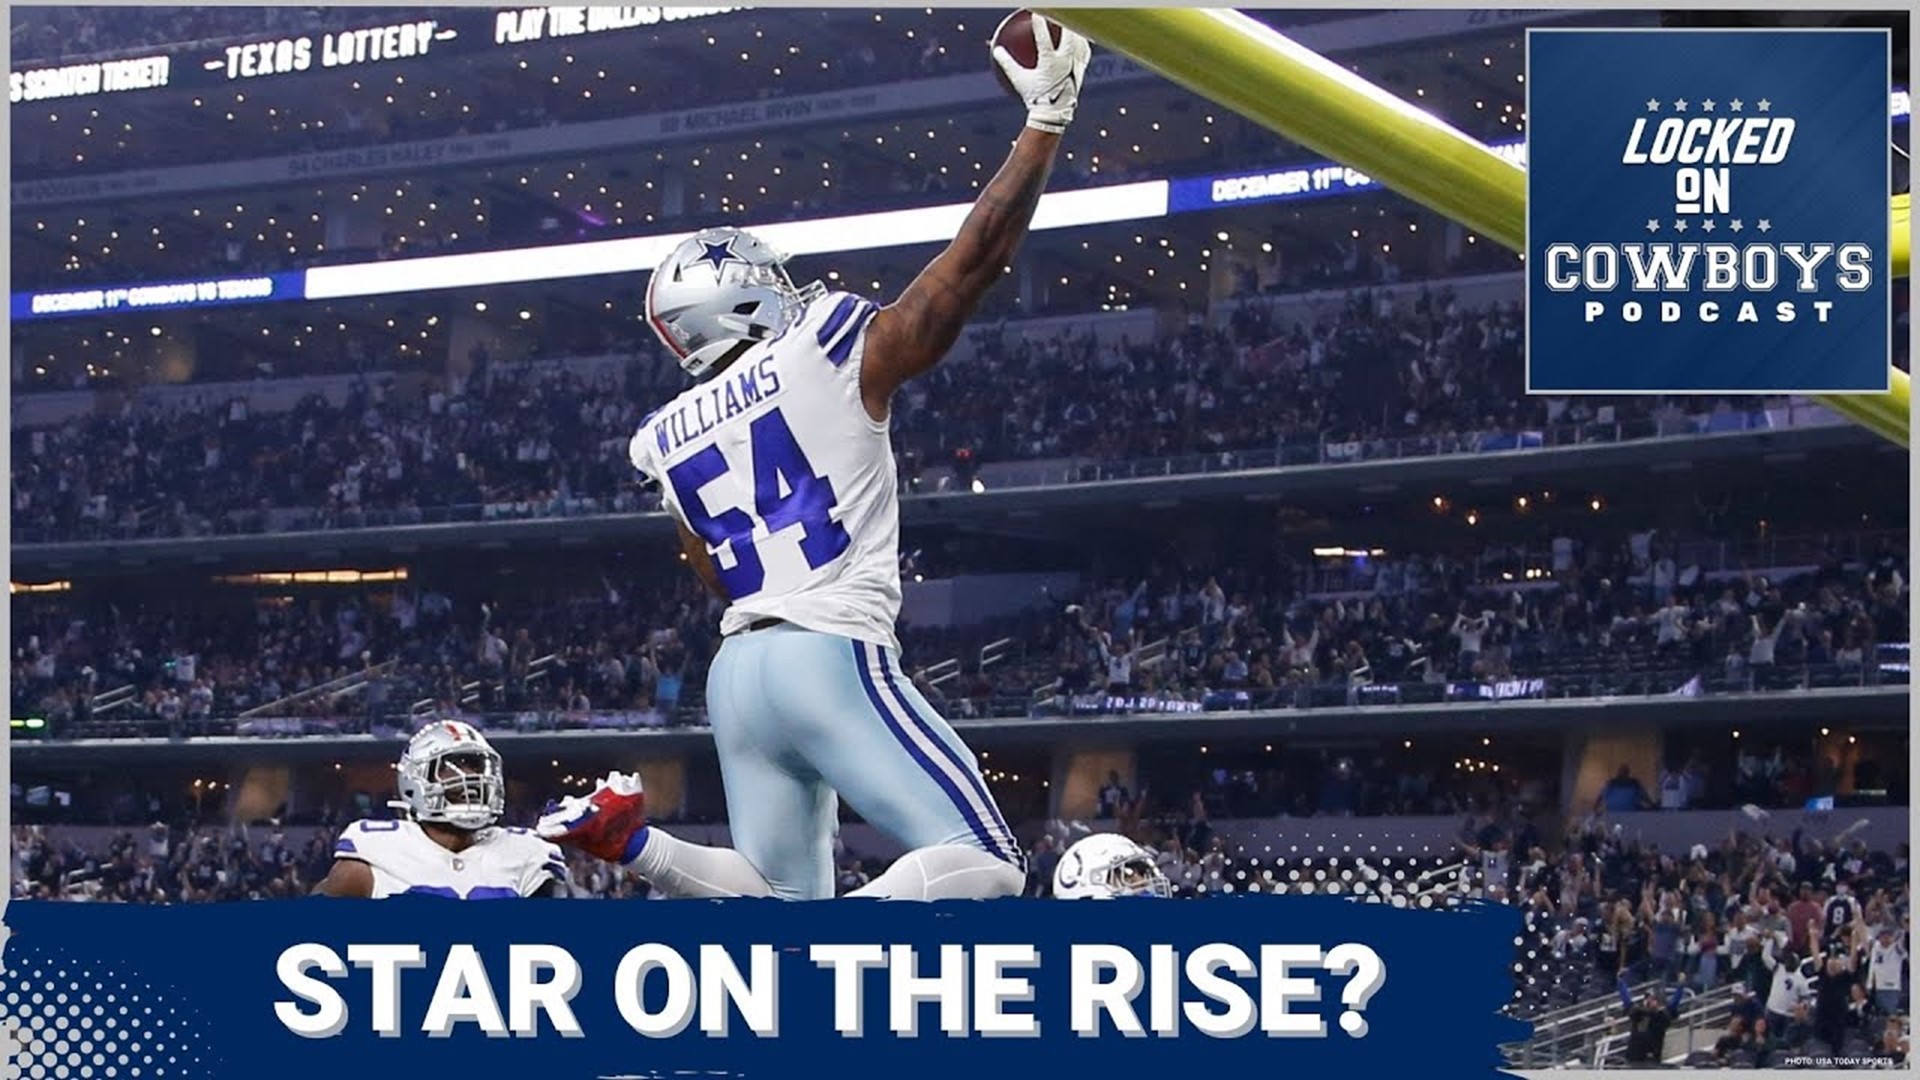 Marcus Mosher and Landon McCool review the Cowboys' defensive ends, talk Micah Parsons and Demarcus Lawrence's seasons, and take a look at Sam Williams' future.